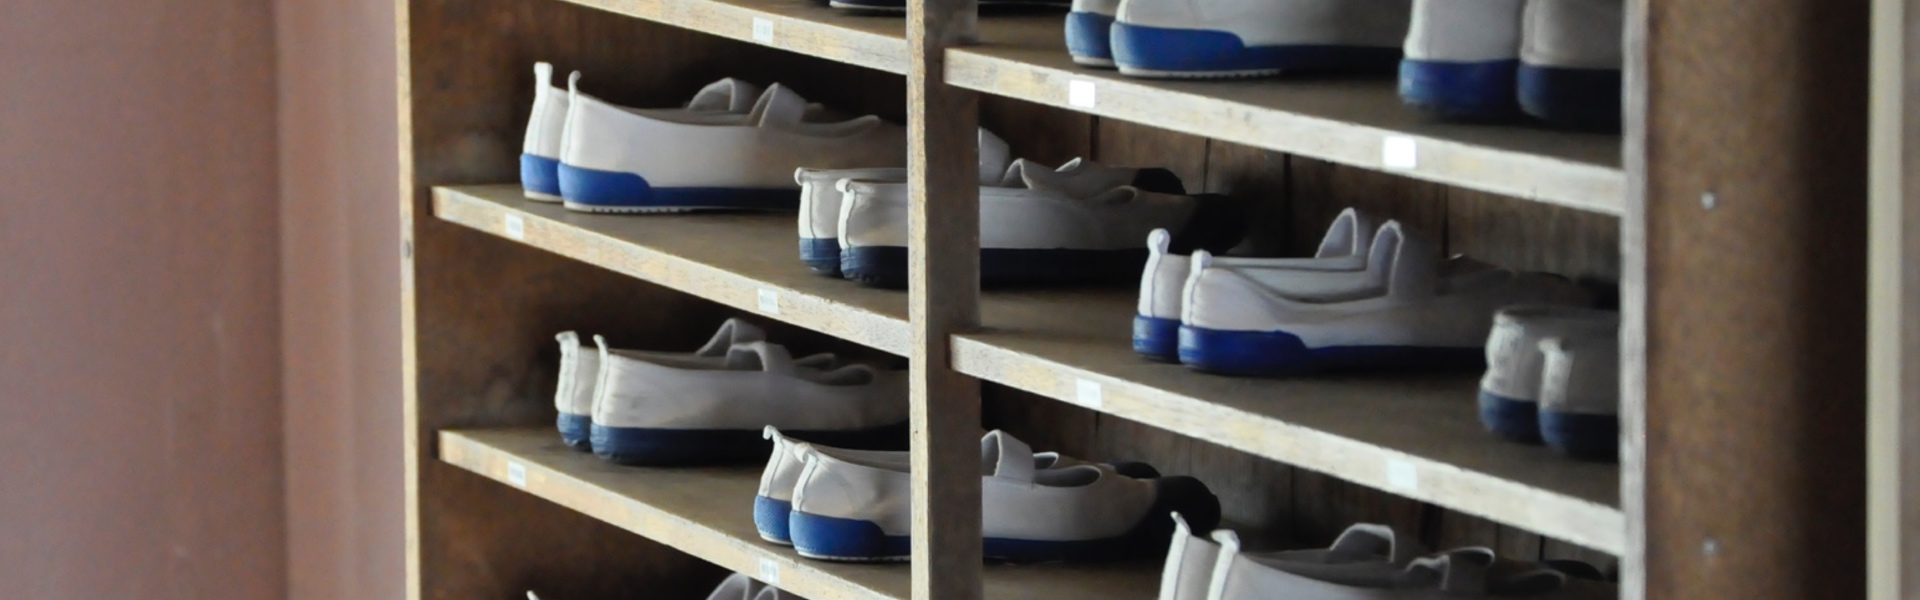 Self-service rack with available pairs of bowling shoes